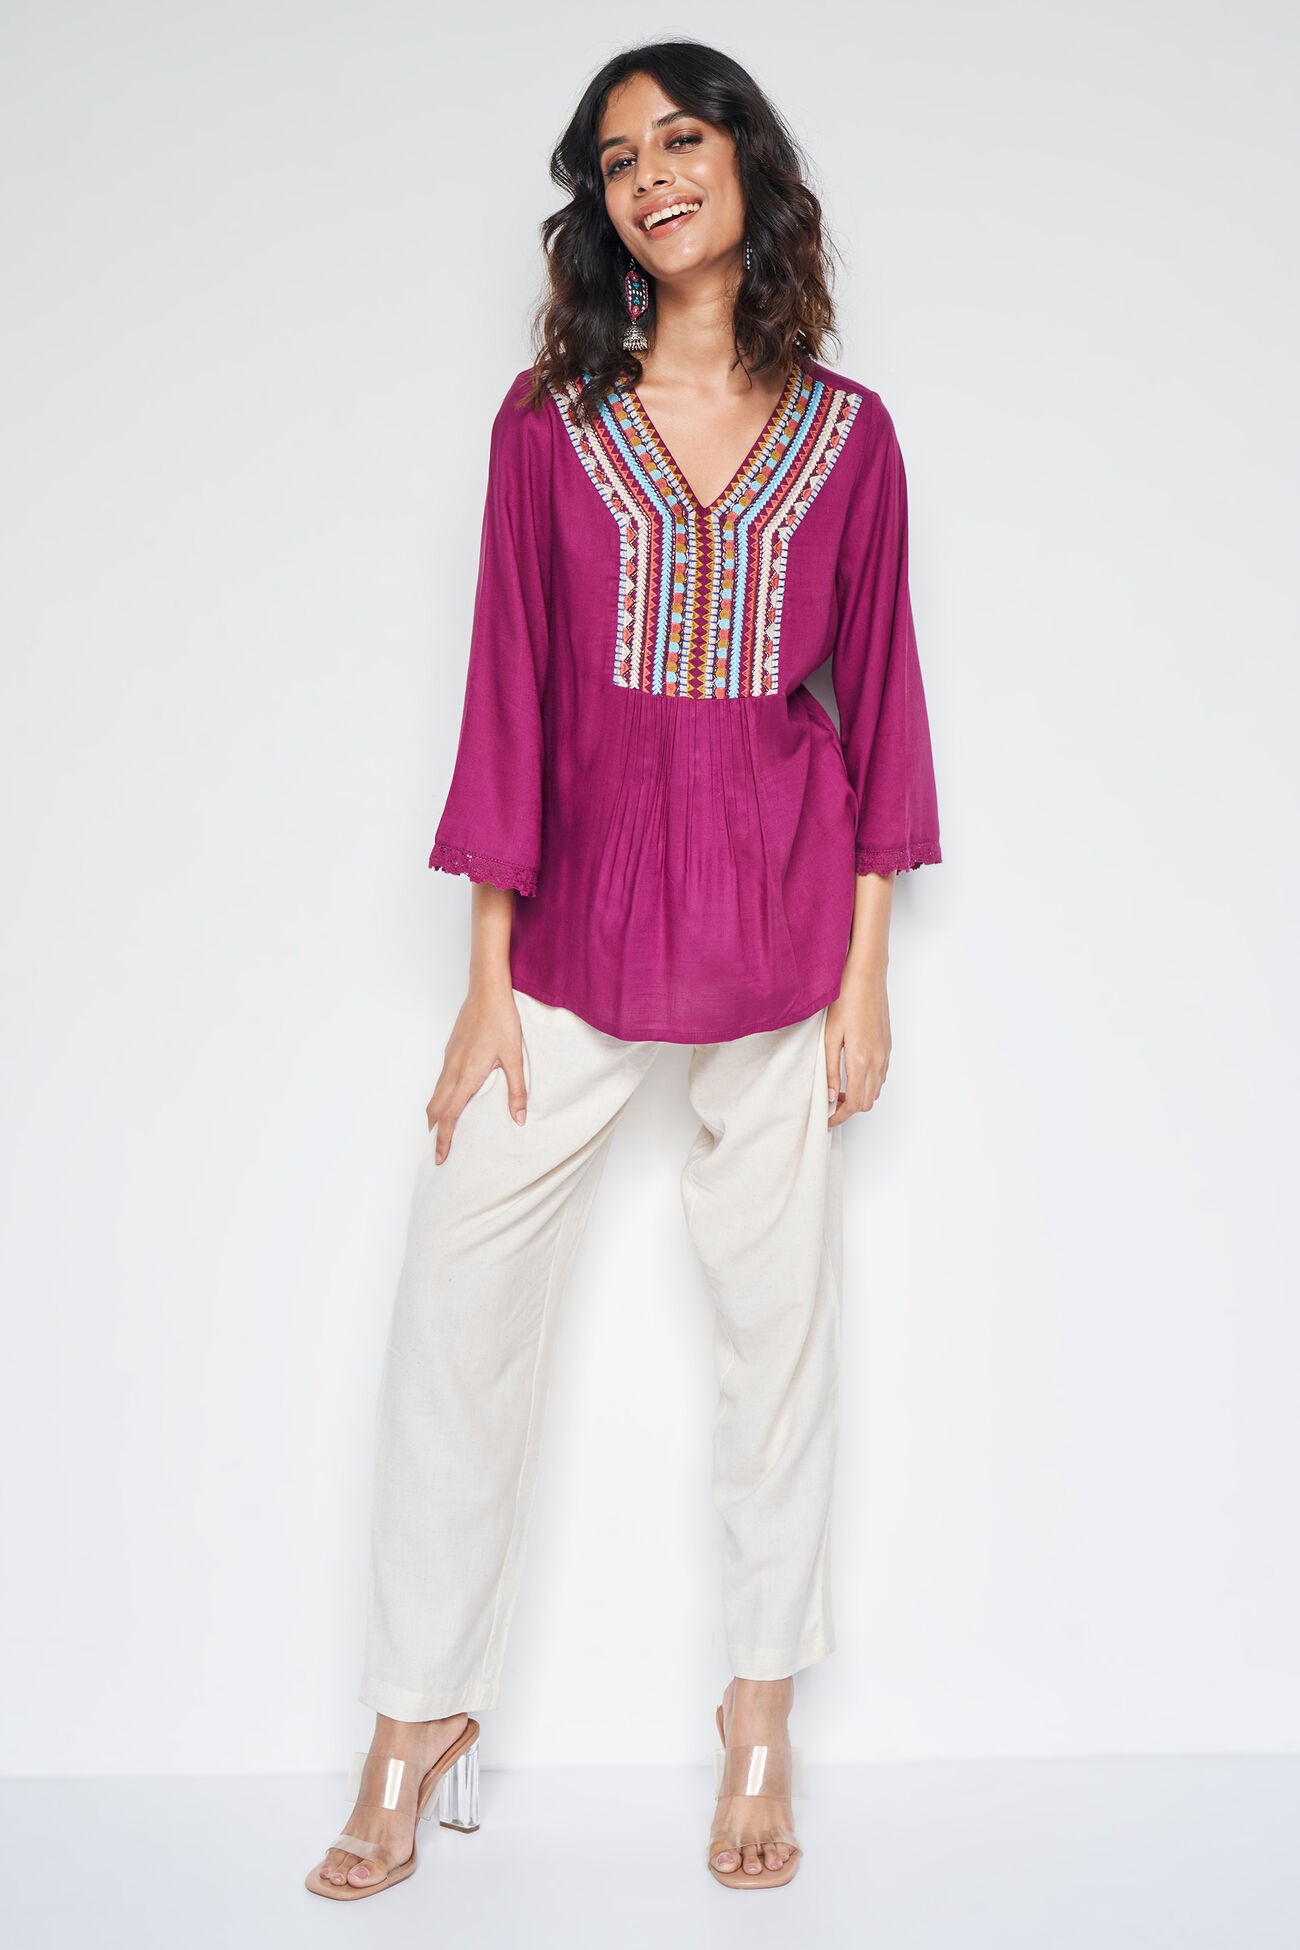 Buy our Wine Solid Straight Top online from globaldesi.in SC ...